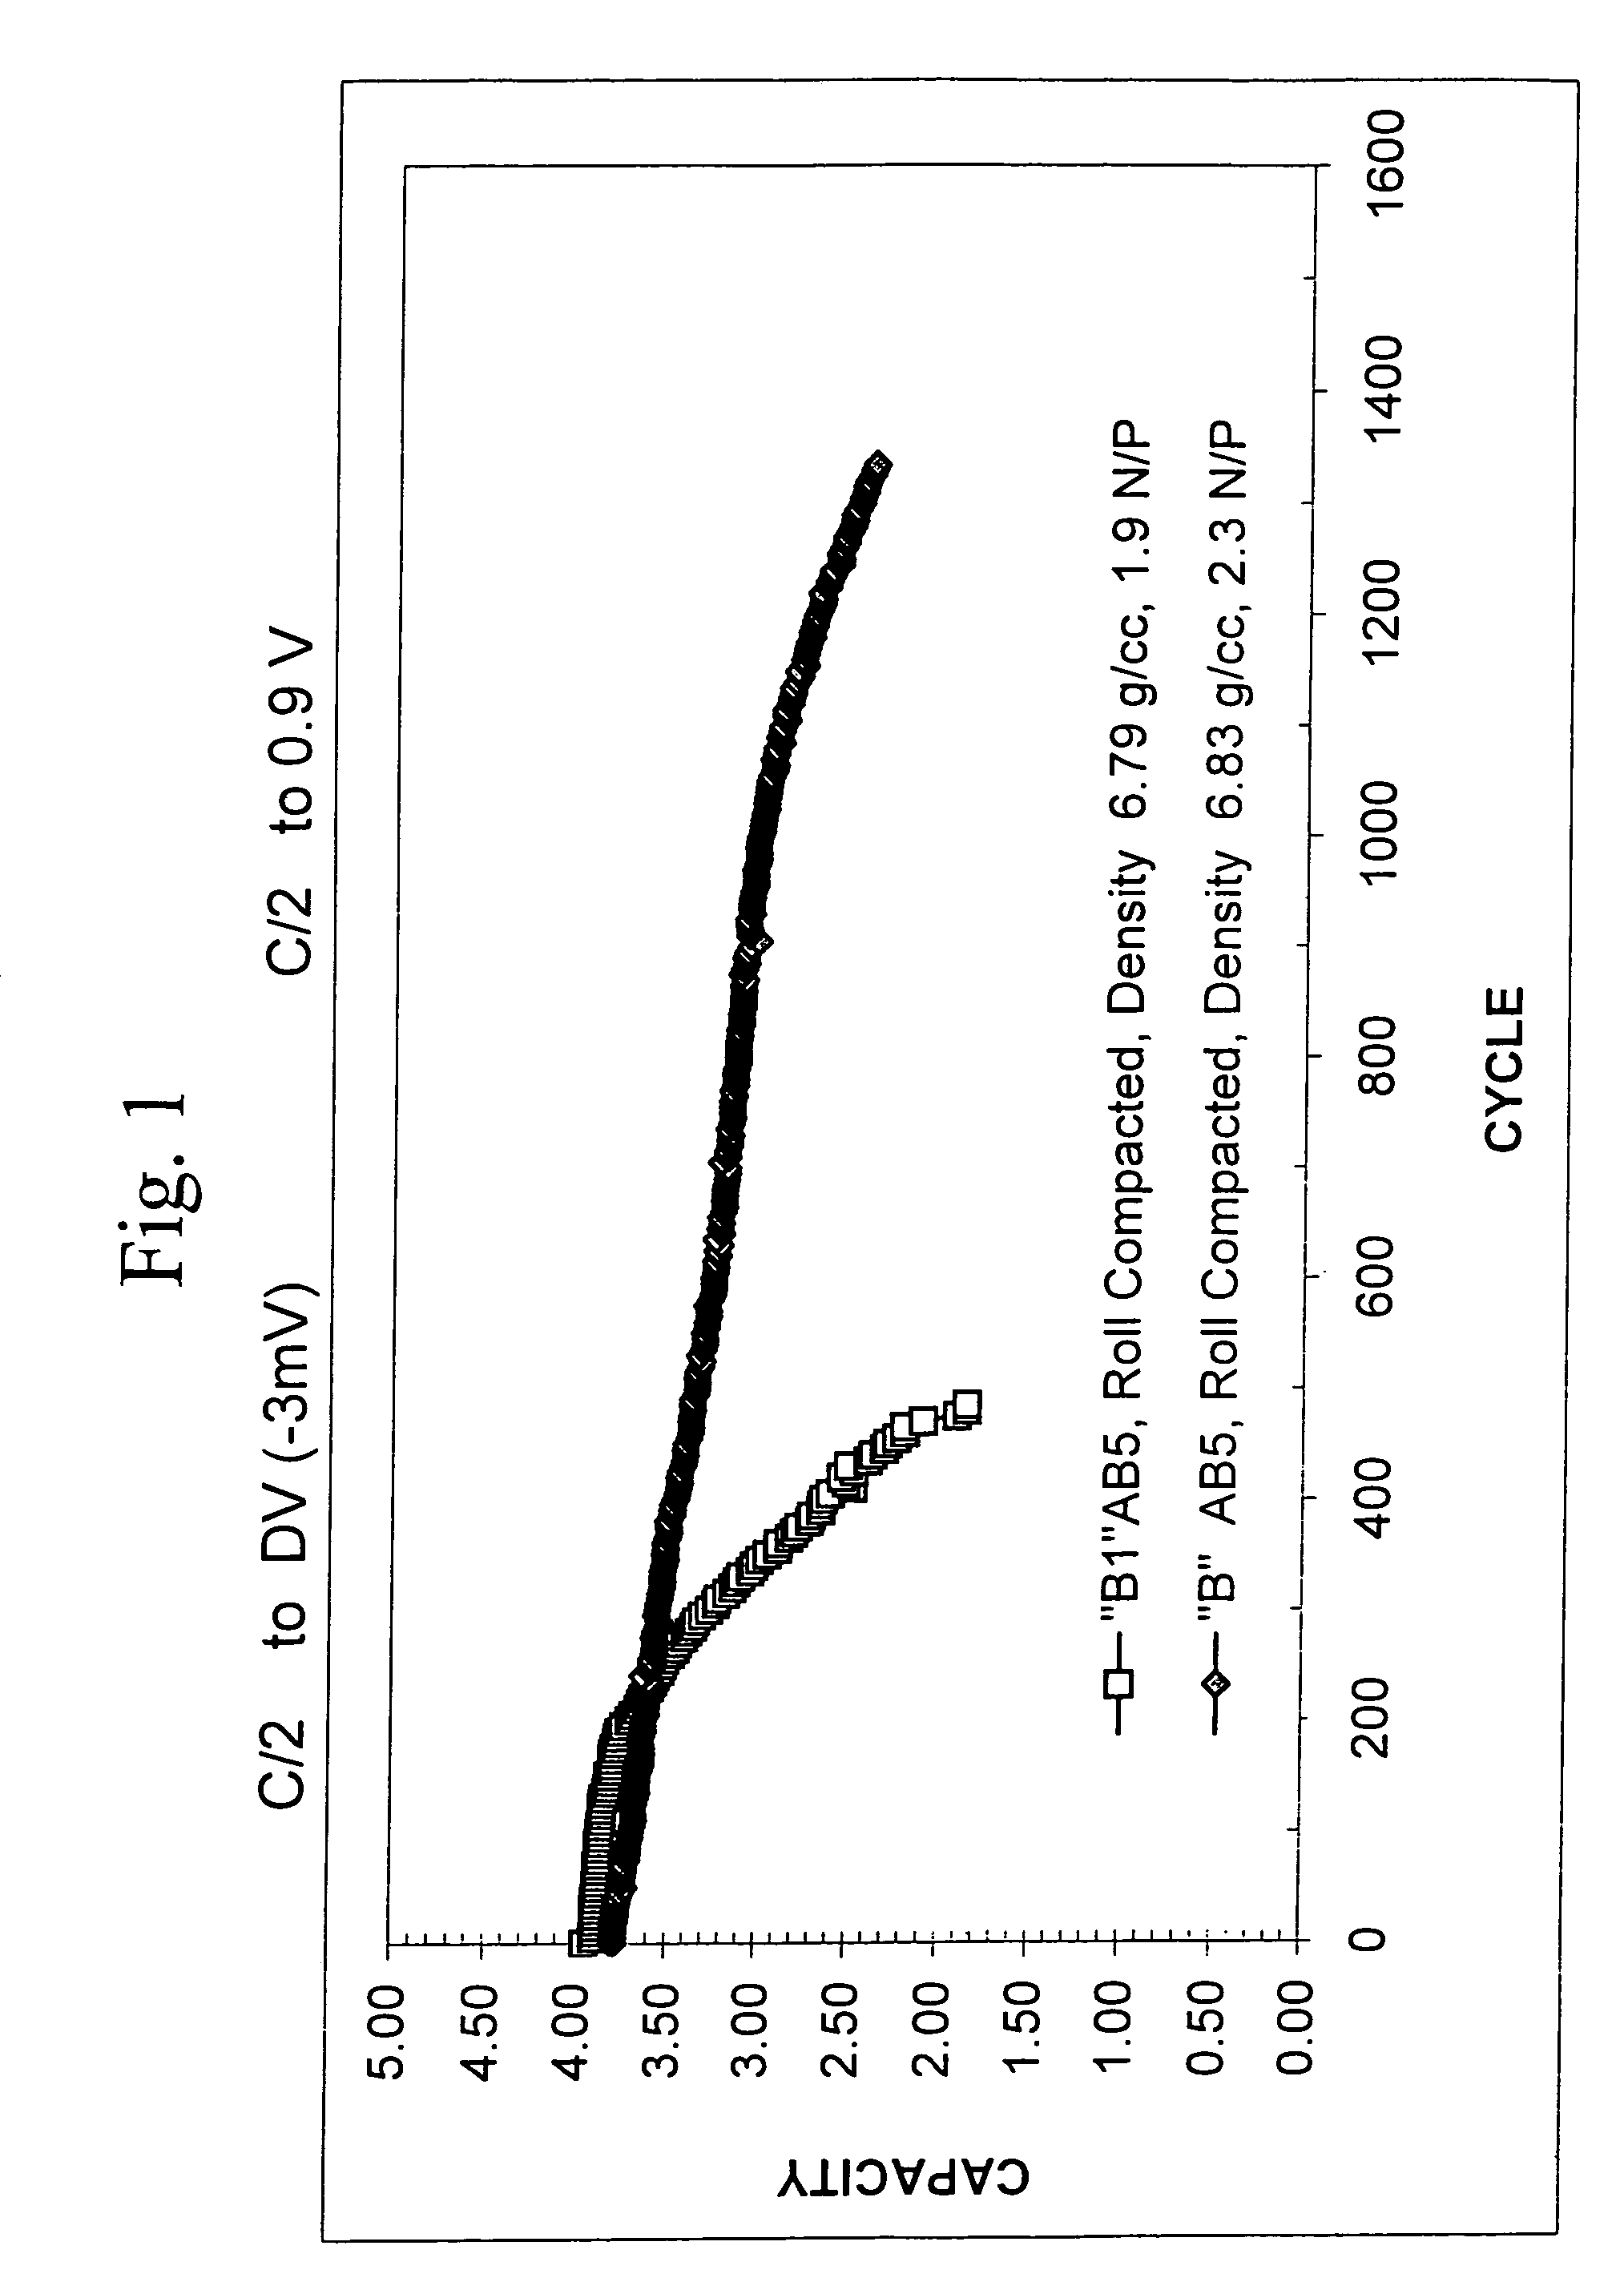 Hydrogen storage alloys having improved cycle life and low temperature operating characteristics